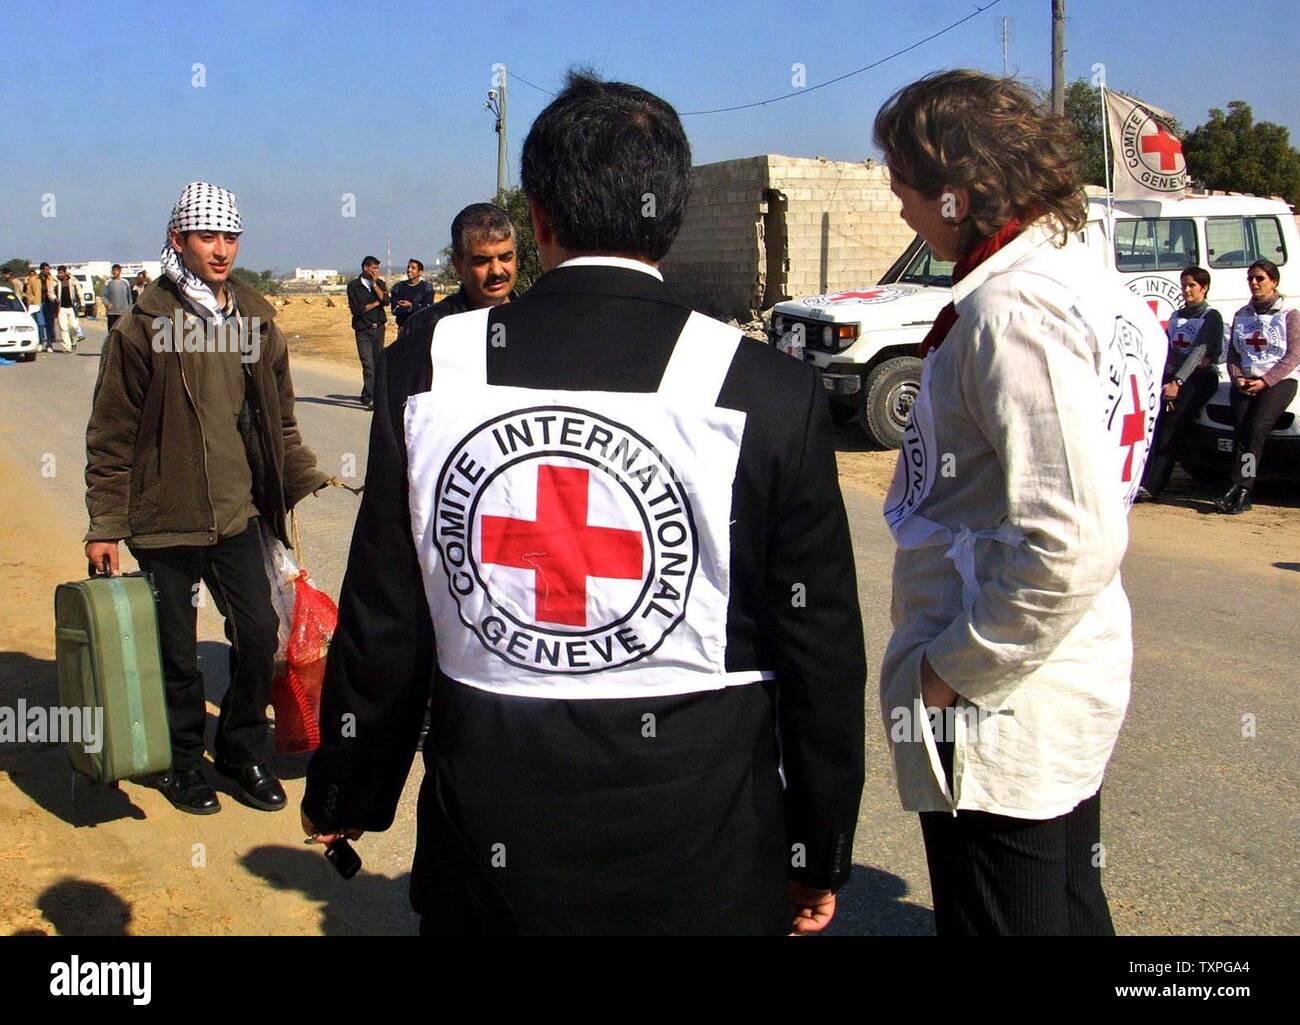 A Palestinian prisoner shakes hands with Red Cross employees after crossing into the Palestinian side of the Erez crossing along the Gaza-Israeli border on January 29, 2004. Israel began releasing more than 400 Palestinian prisoners as part of a controversial exchange deal with the Lebanese Hezbollah militia. (UPI Photo/Ismail Mohamad) Stock Photo